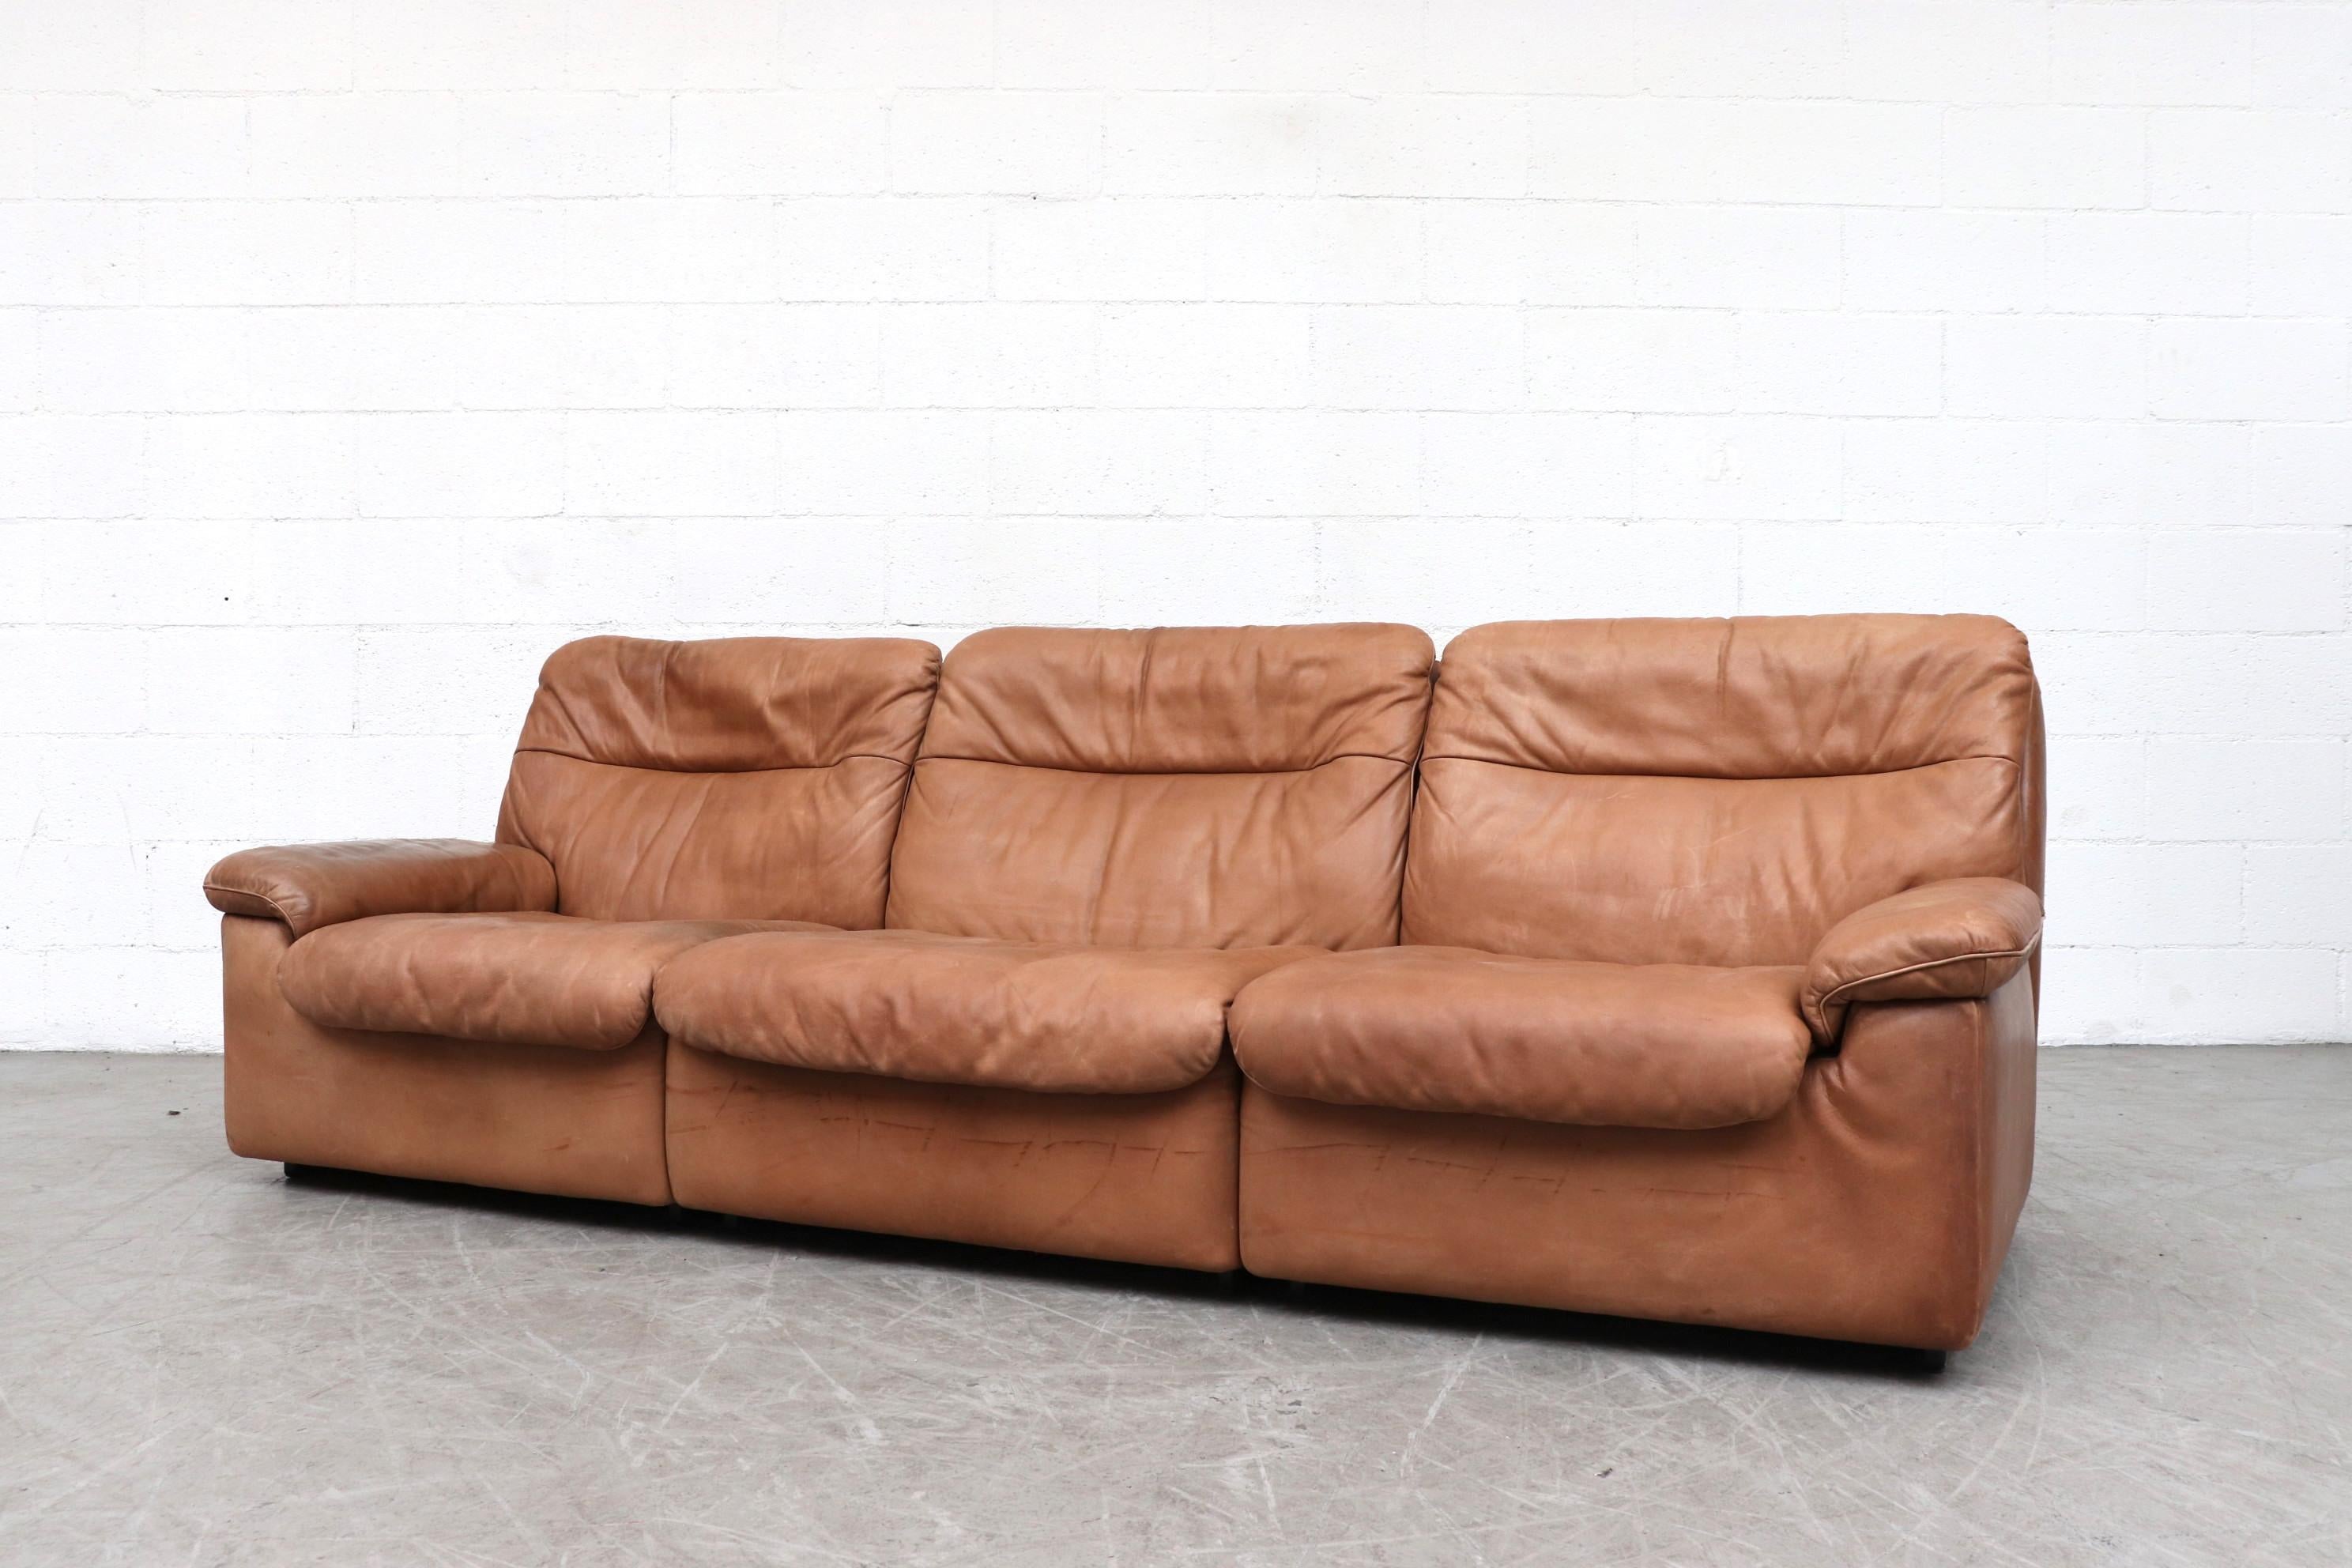 Handsome De Sede DS 66 natural leather 3-Seat Sofa. Thick light brown leather with nice patina. In original condition with some signs of wear consistent with age and use. Matching loveseat (LU922413830531) and lounge chair available